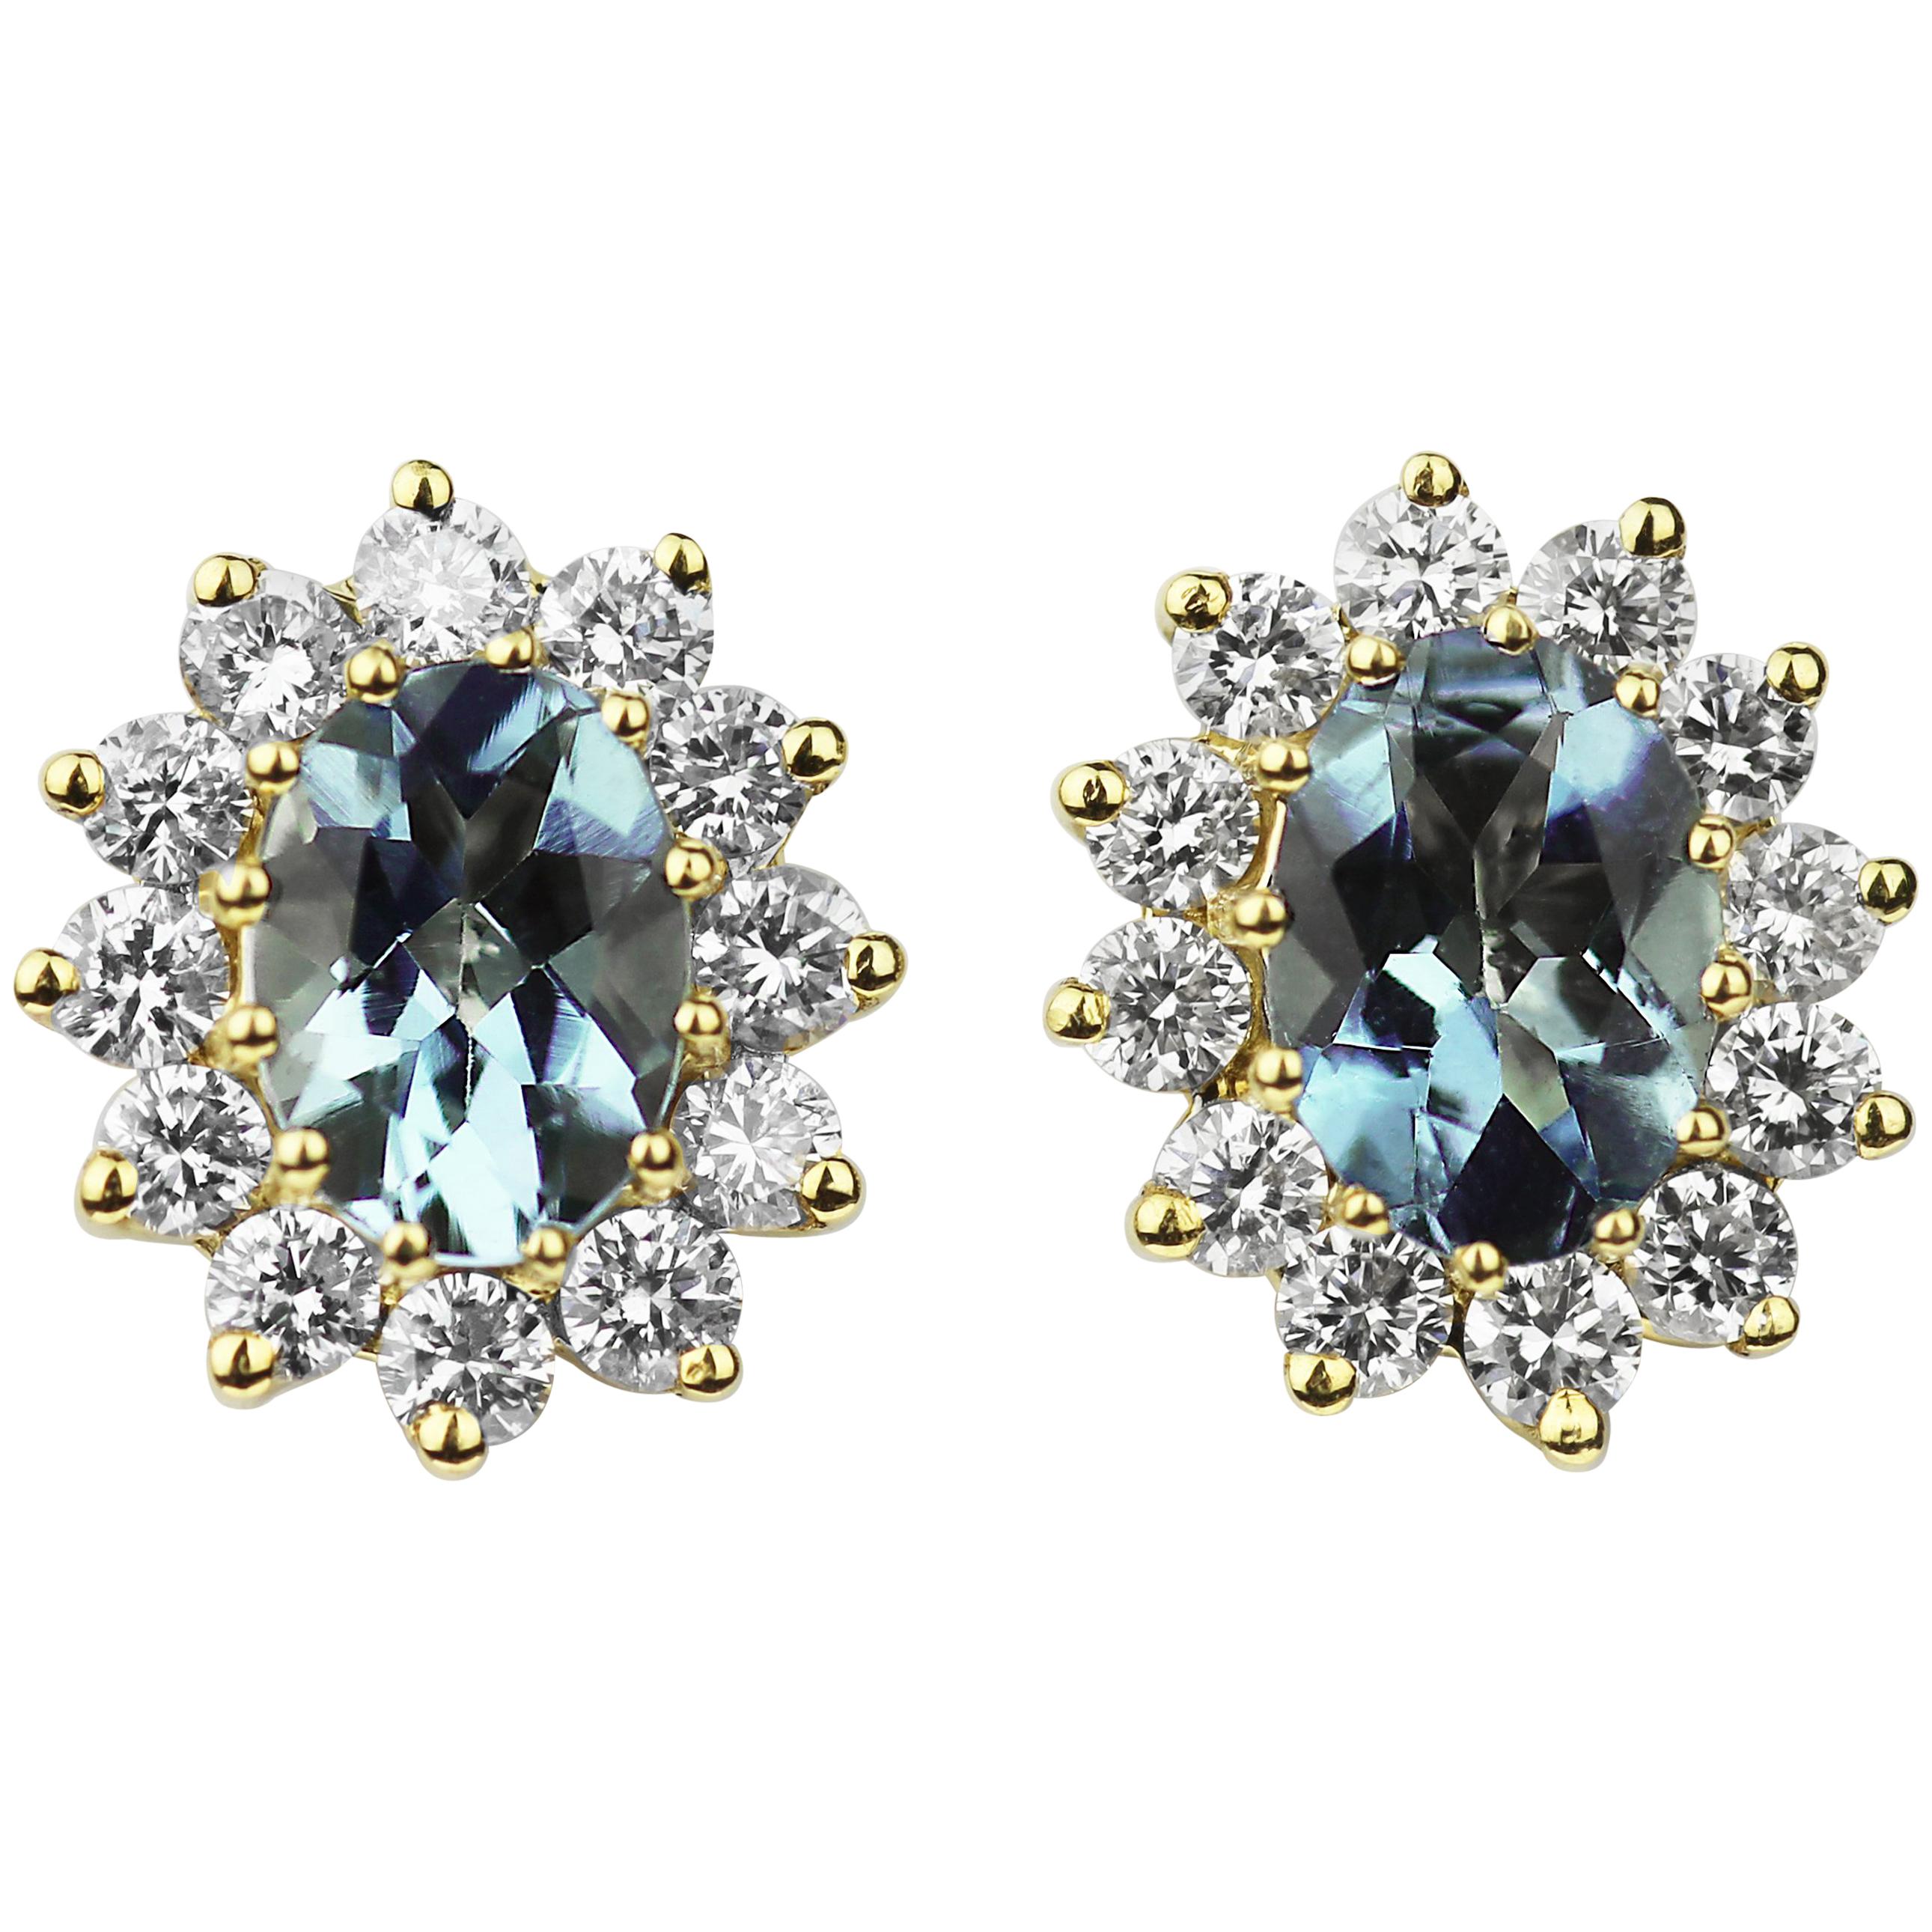 Oval Shape Aquamarine with Diamonds Cluster Earrings in 18 Carat Yellow Gold